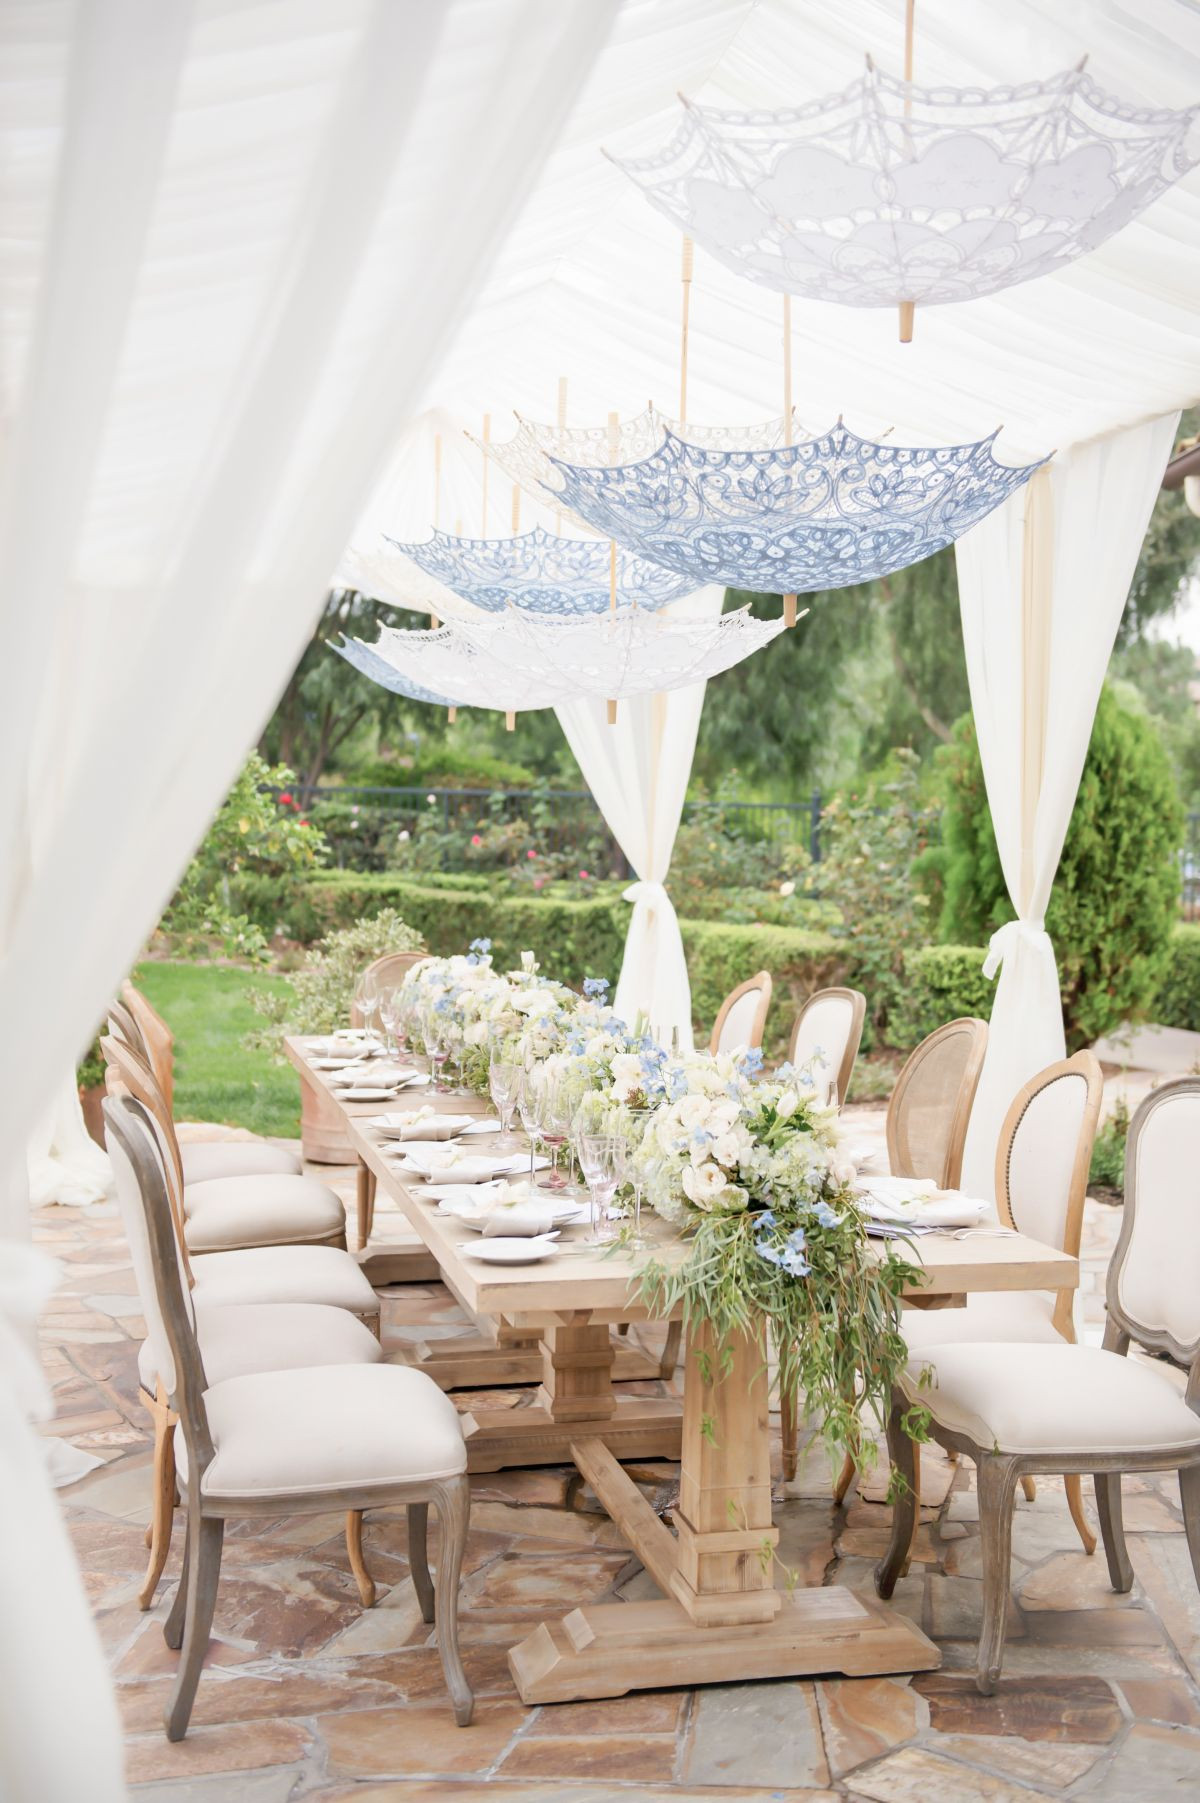 All White Backyard Party Ideas
 50 Outdoor Party Ideas You Should Try Out This Summer